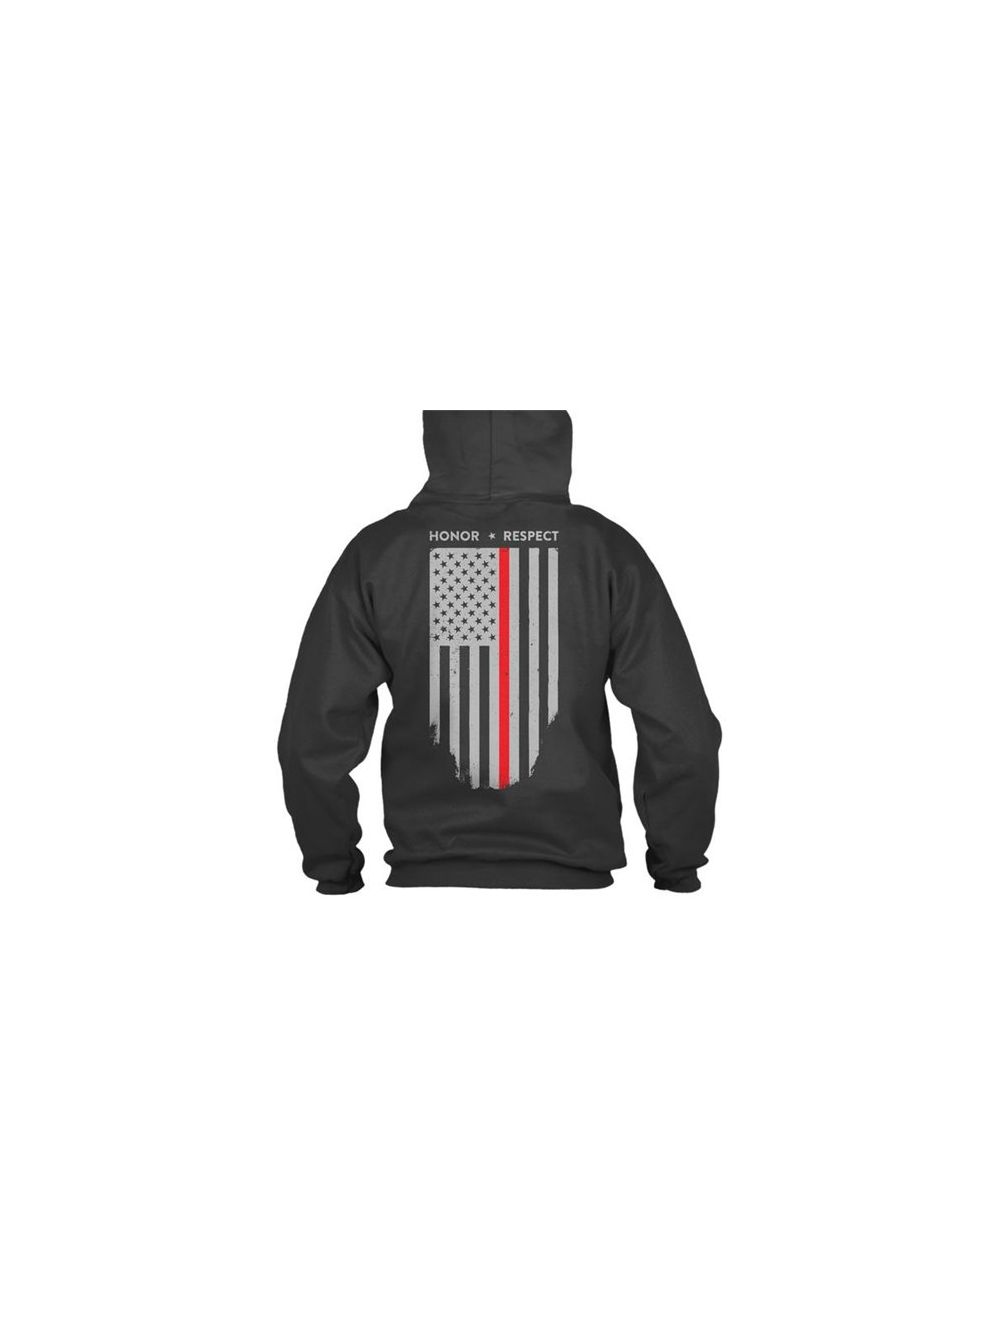 Hoodie - Thin Red Line American Flag Honor & Respect